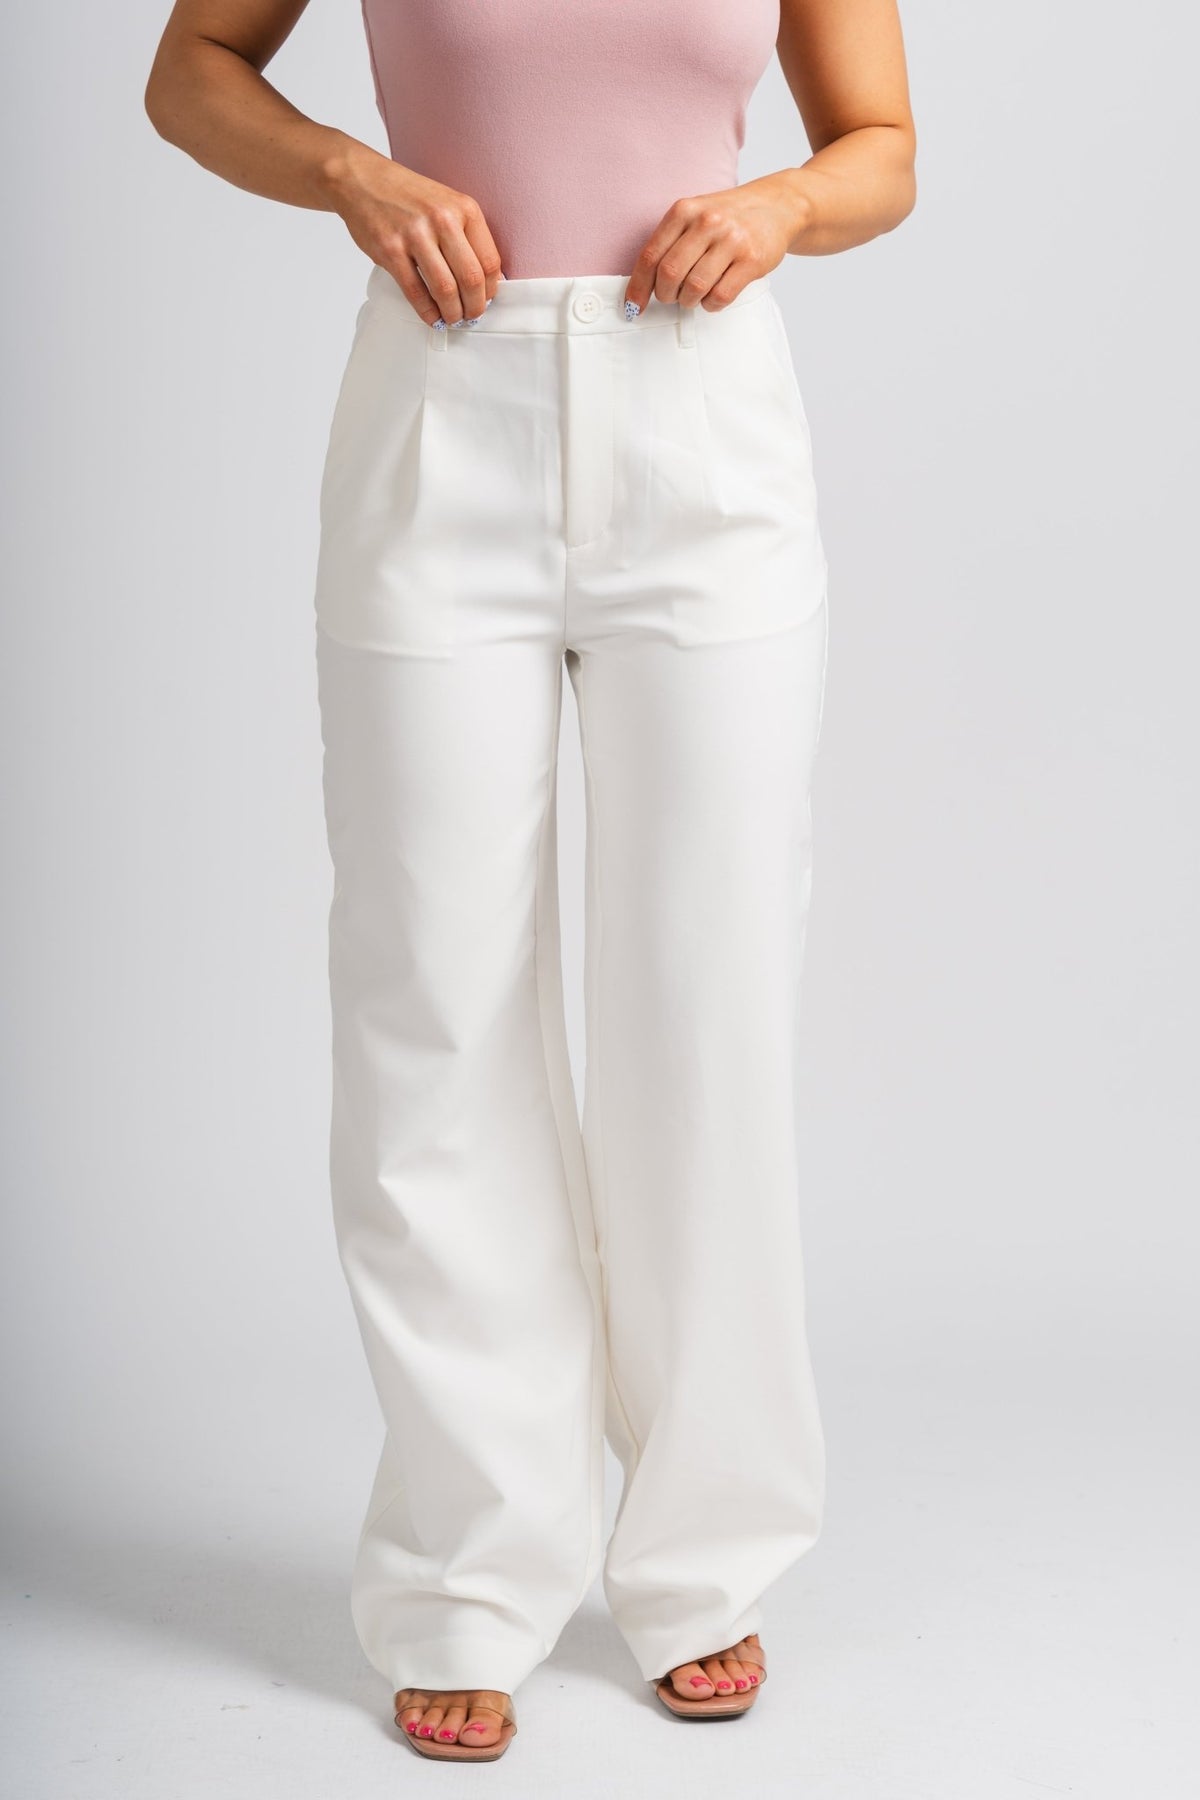 Pleated wide leg pants white - Stylish Pants - Cute Easter Outfits at Lush Fashion Lounge Boutique in Oklahoma